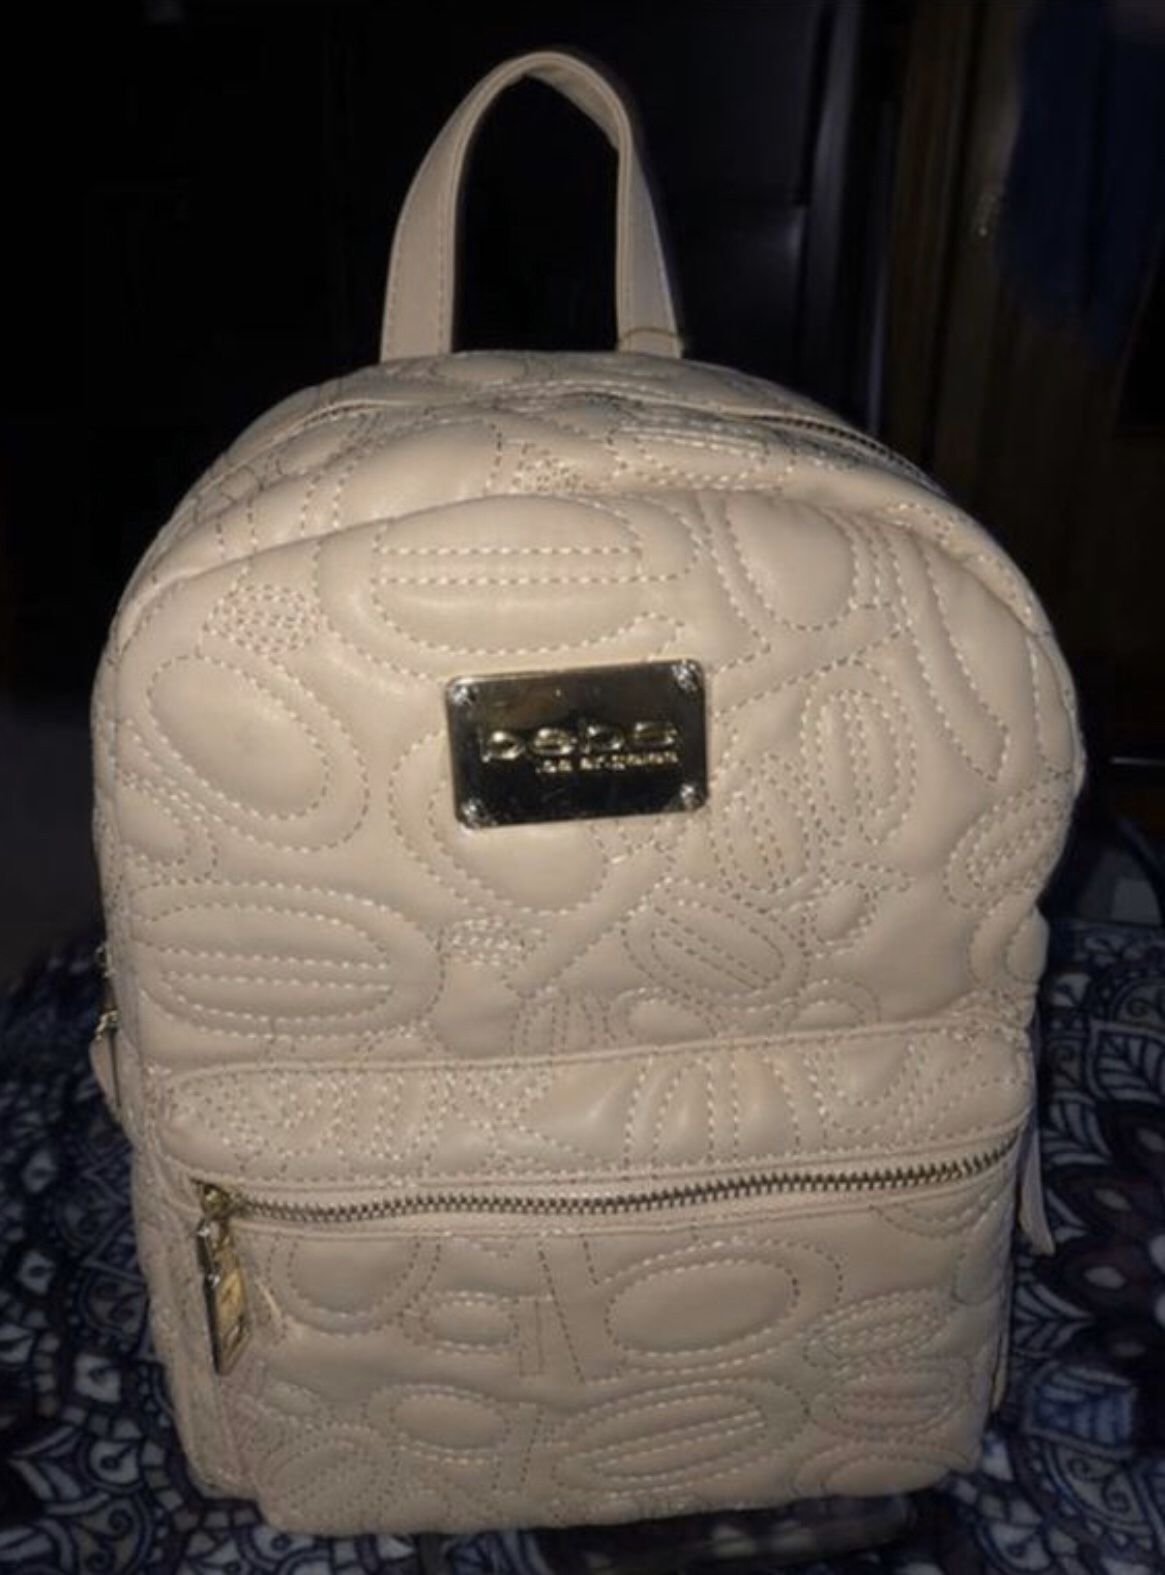 BRAND NEW : BEBE BACKPACK : NEW WITH TAGS